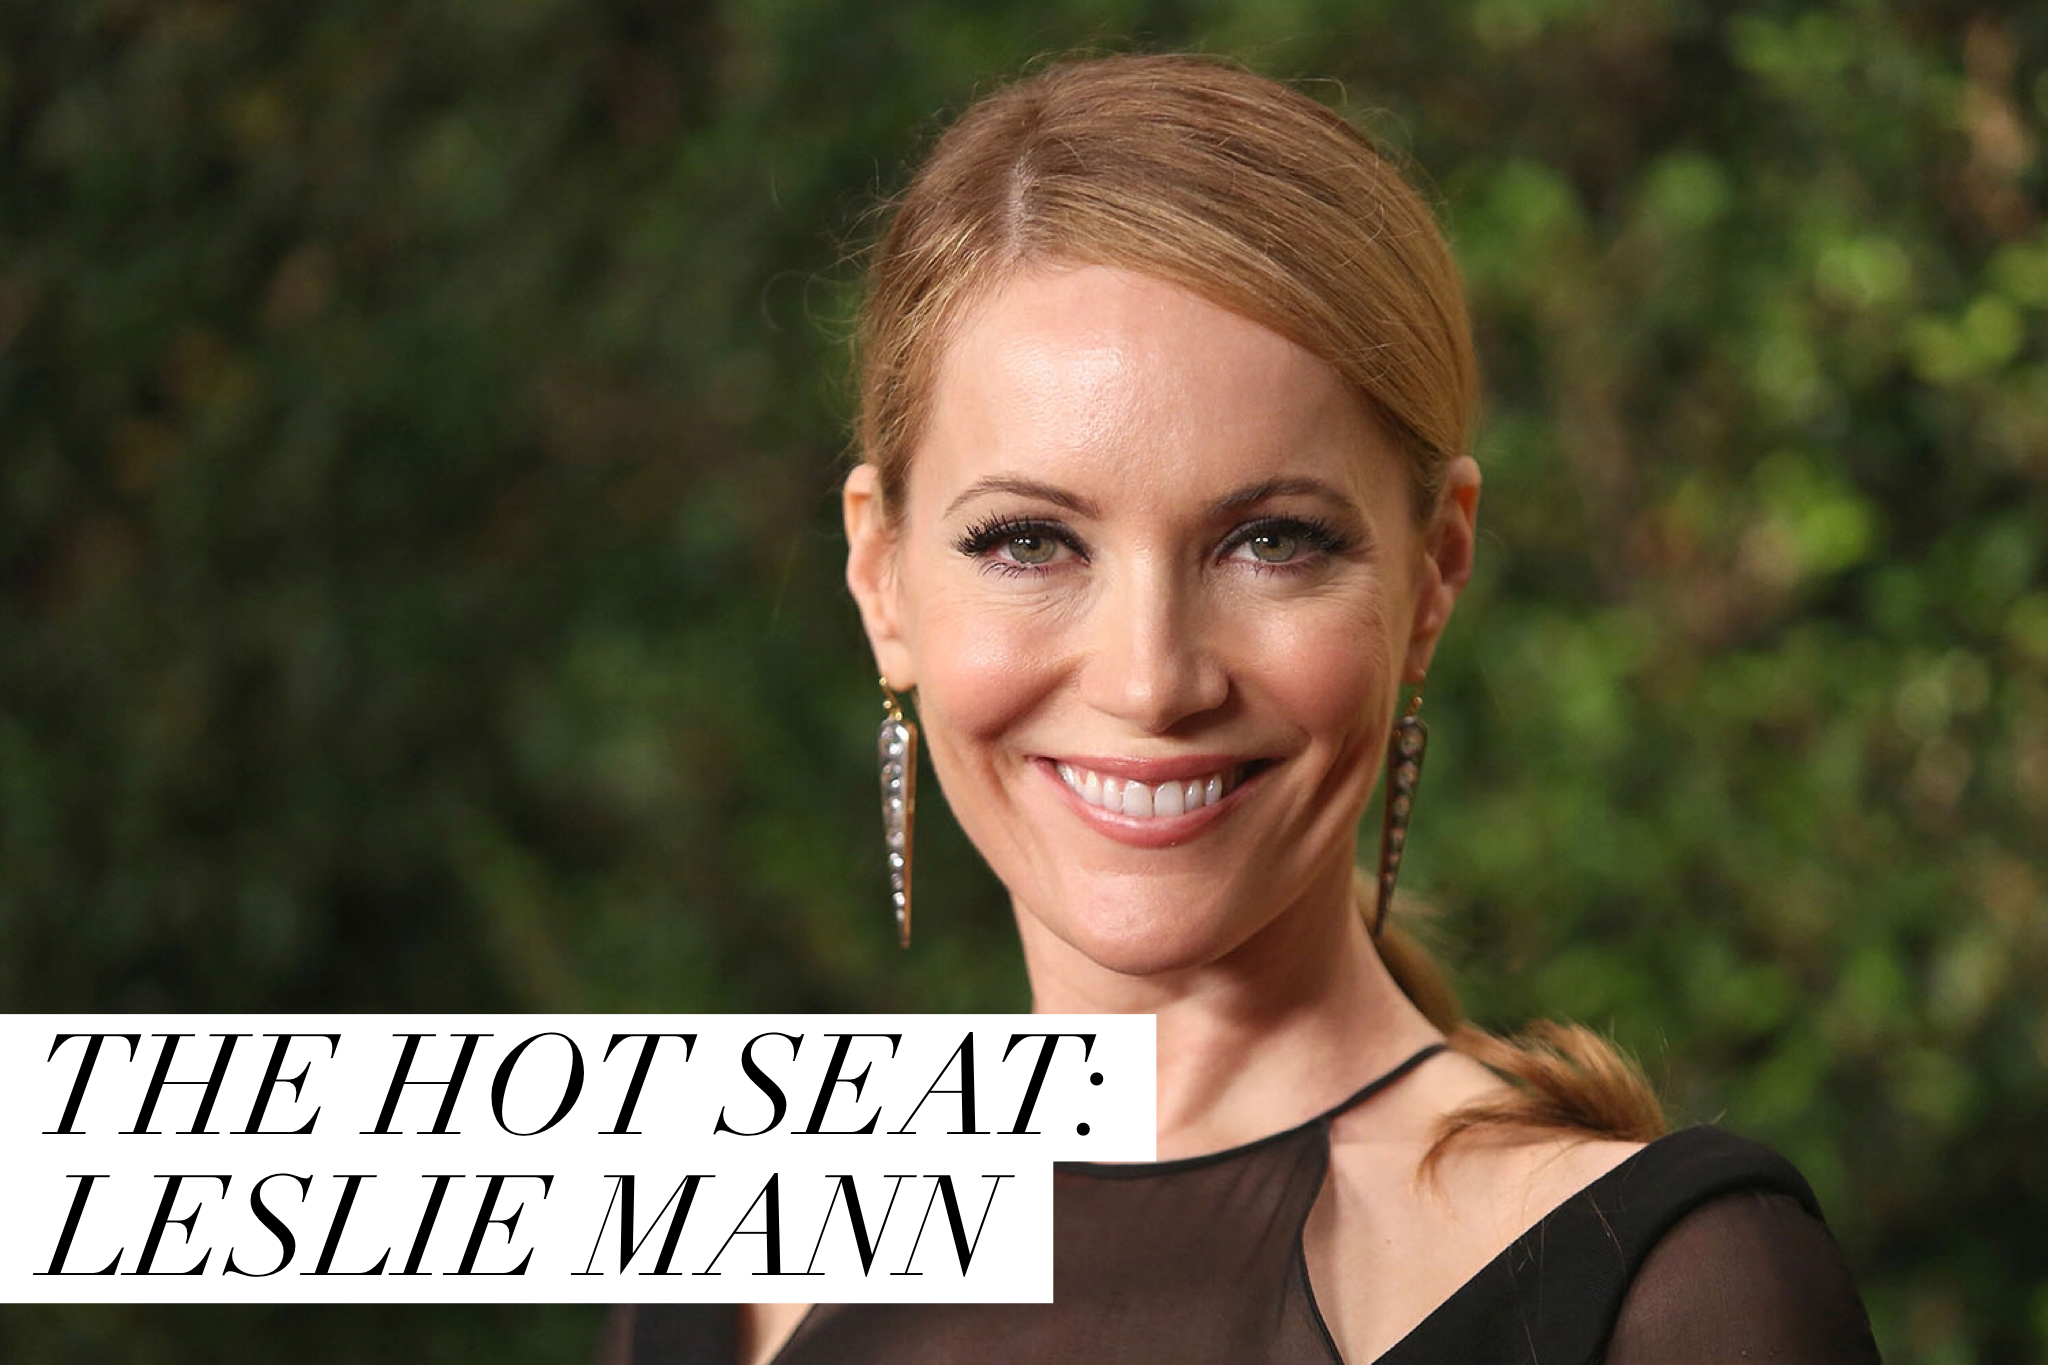 Comedic actress Leslie Mann won us over in films like “Knocked Up” and “The...